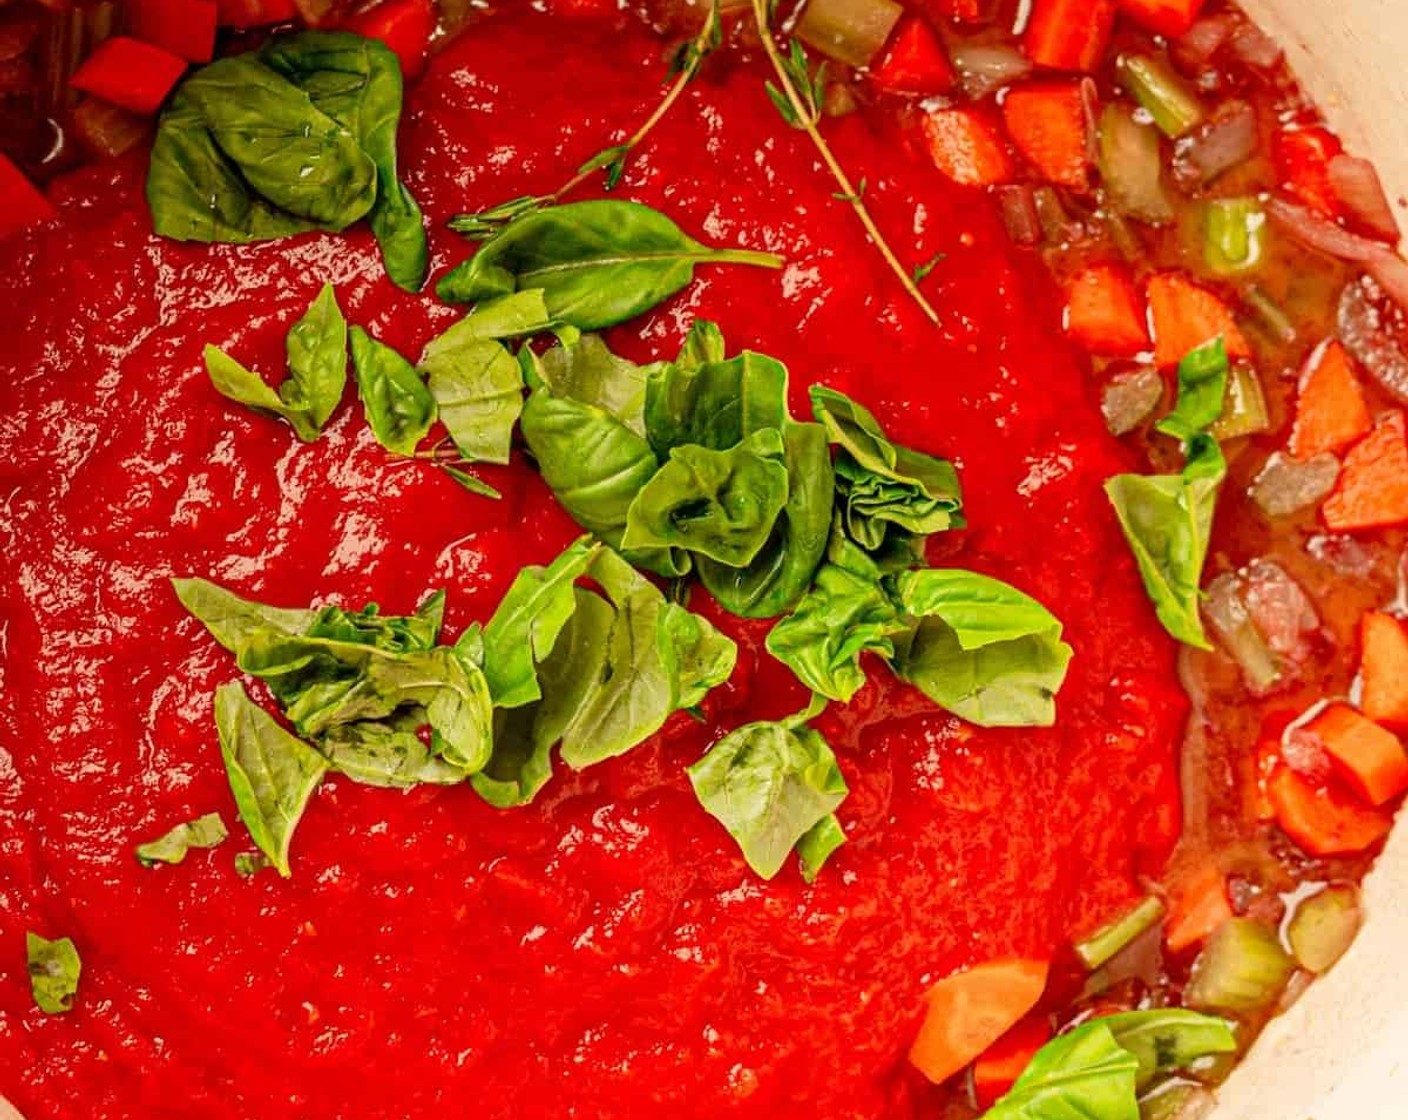 step 5 Next, add Crushed Tomatoes (1 can), Salt (1 tsp), Ground Black Pepper (to taste), Fresh Basil (1/4 cup), and Fresh Thyme (1 sprig).